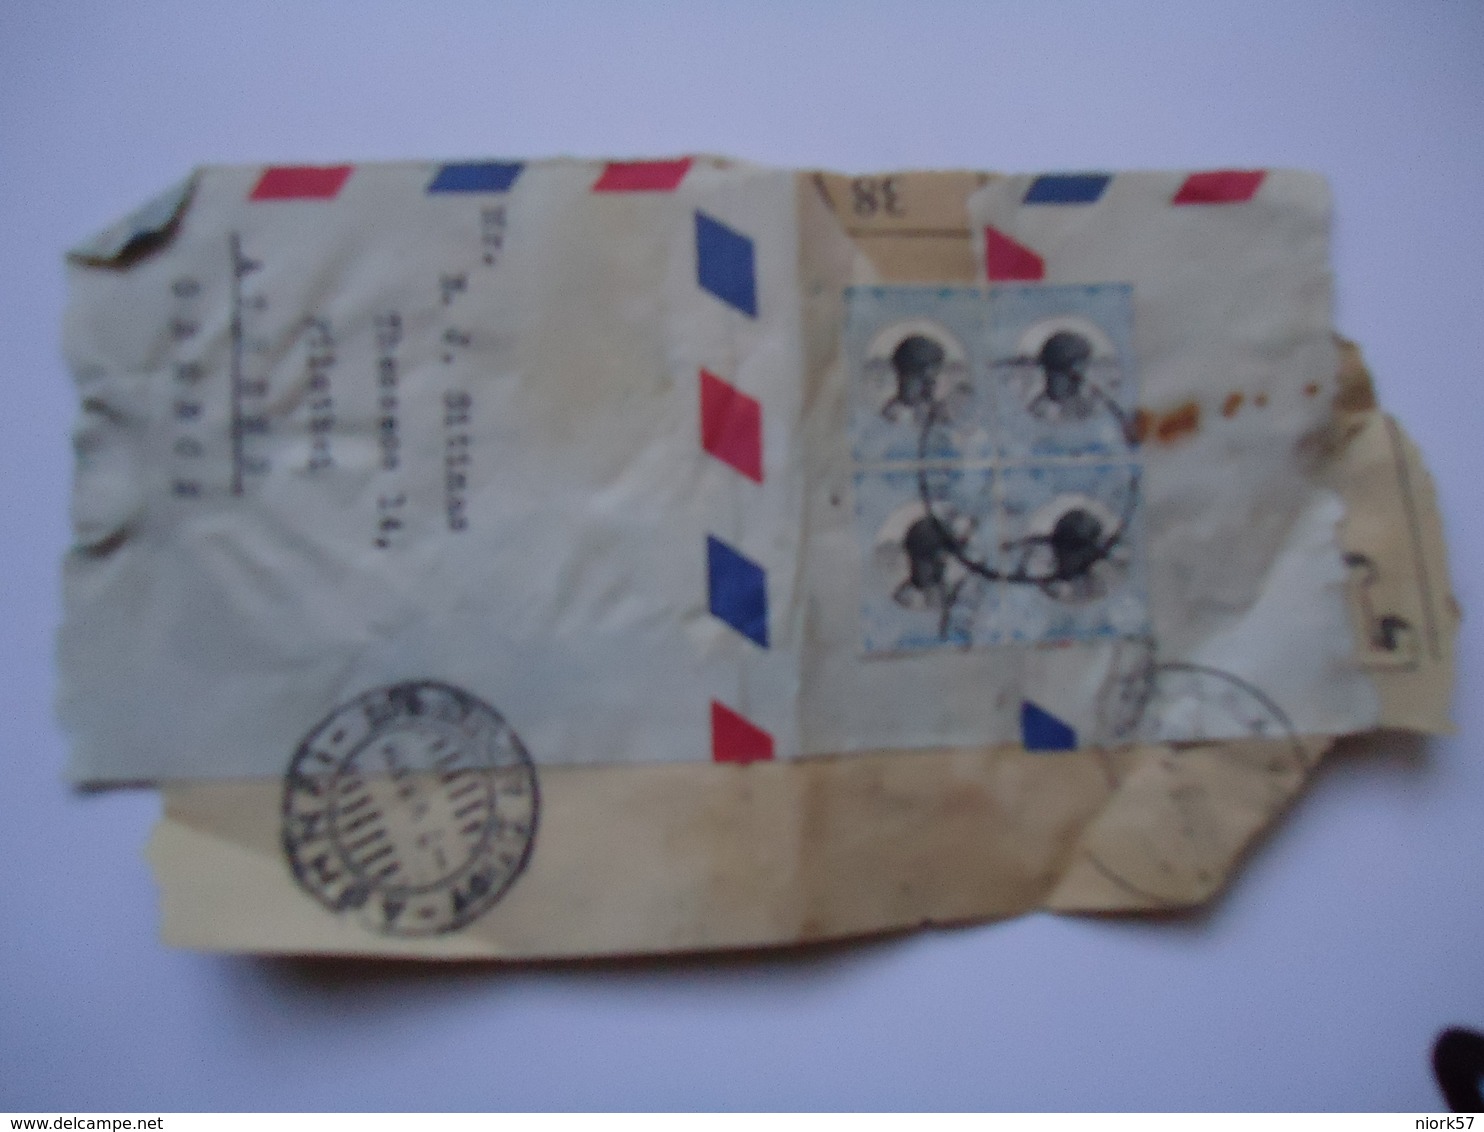 GREECE SUDAN  STAMPS ON PAPERS   WITH POSTMARK  1959  ATHENS XALANDRION - Maschinenstempel (Werbestempel)